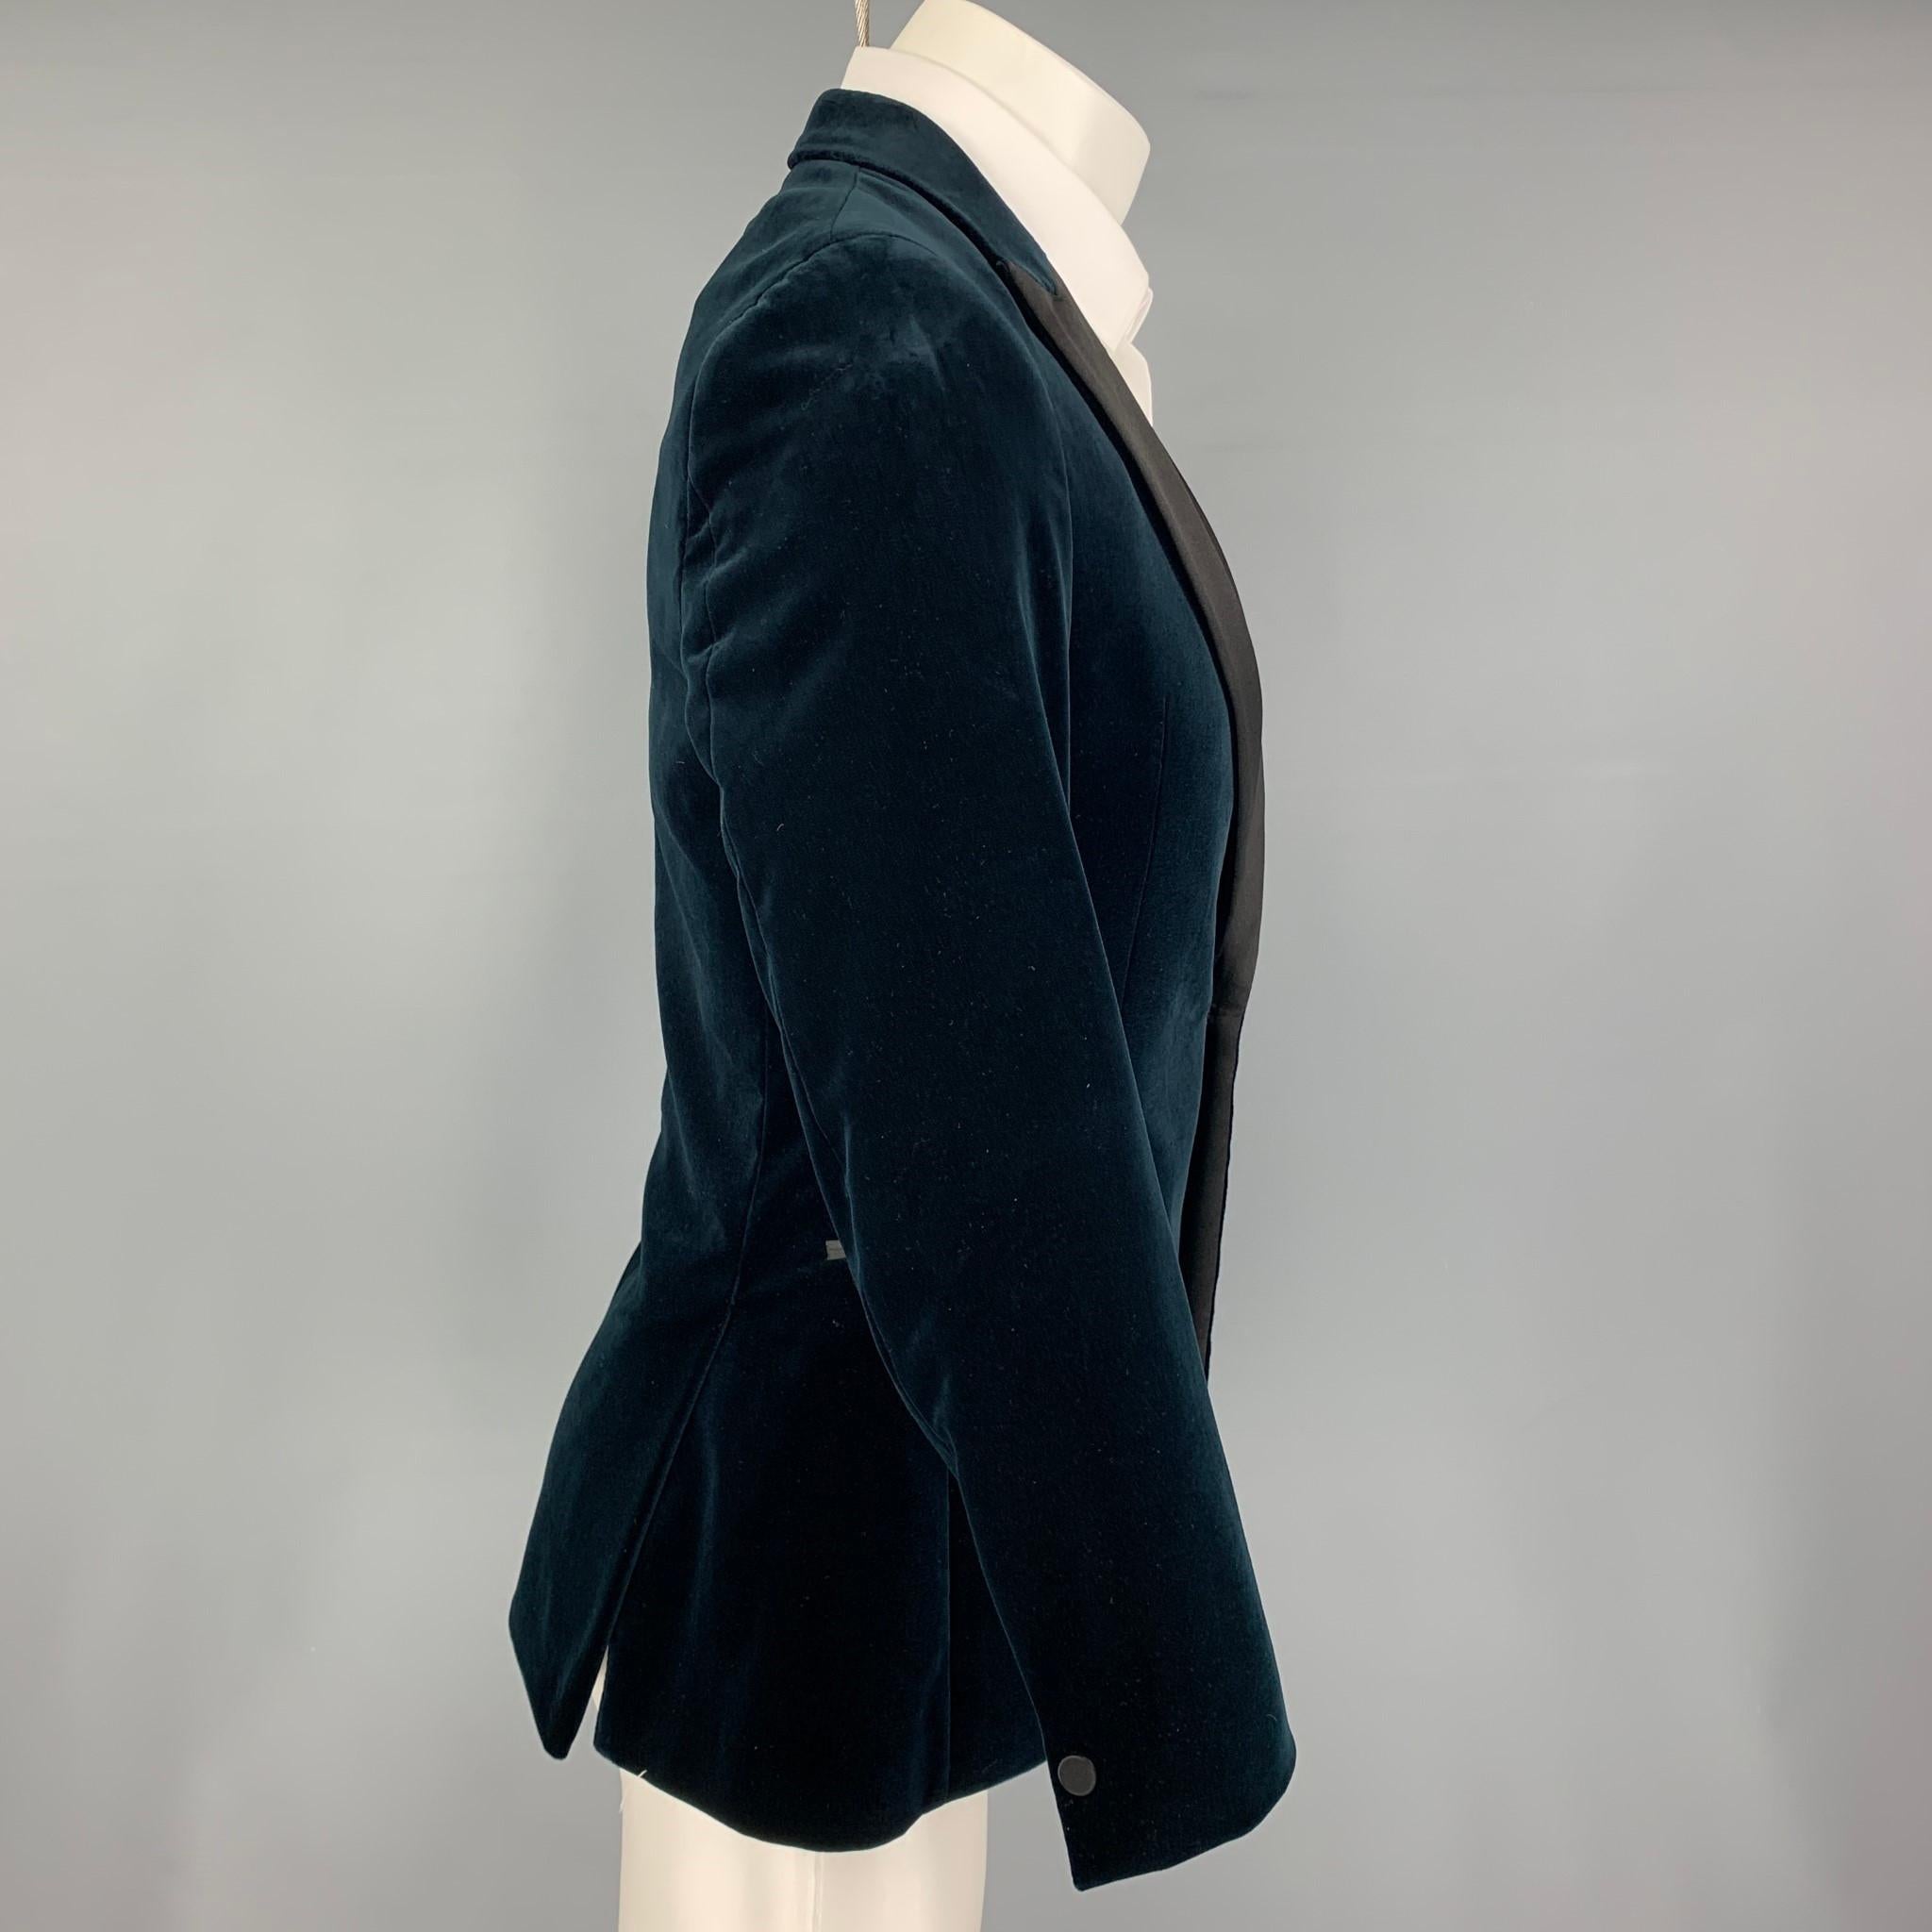 THEORY sport coat comes in a navy & black velvet cotton with a full liner featuring a peak lapel, slit pockets, double back vent, and a single button closure. 

Excellent Pre-Owned Condition.
Marked: 36 R

Measurements:

Shoulder: 17 in.
Chest: 36